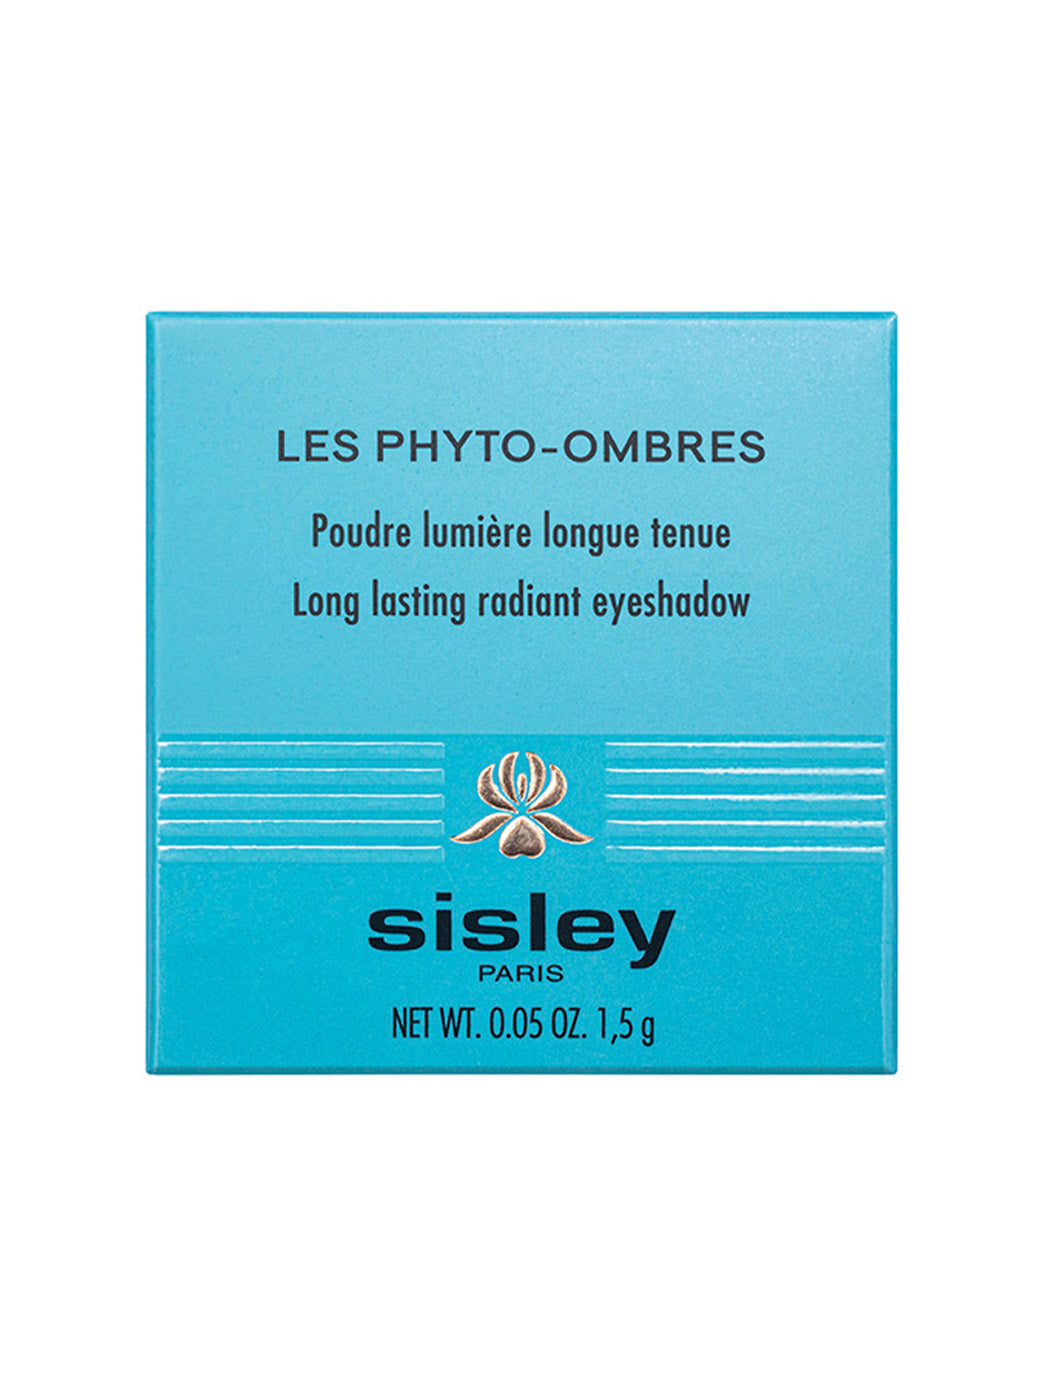 42472957051030 - Les Phyto-Ombres